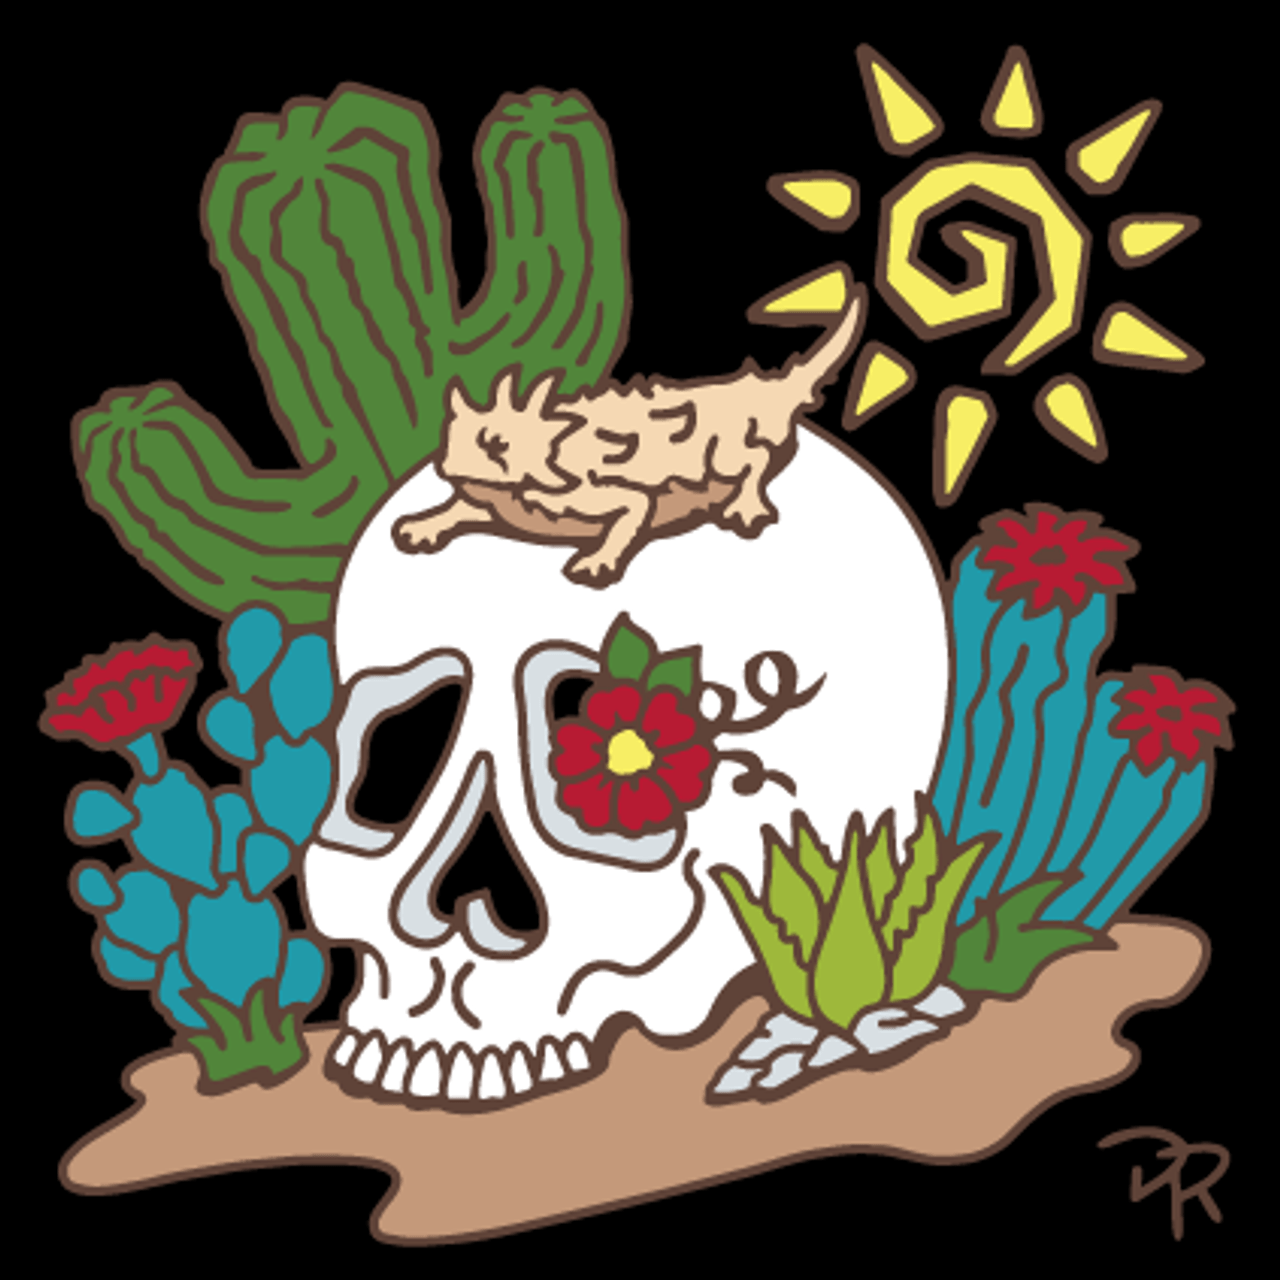 6x6 Tile Day of the Dead Skull with Cactus Garden Friend